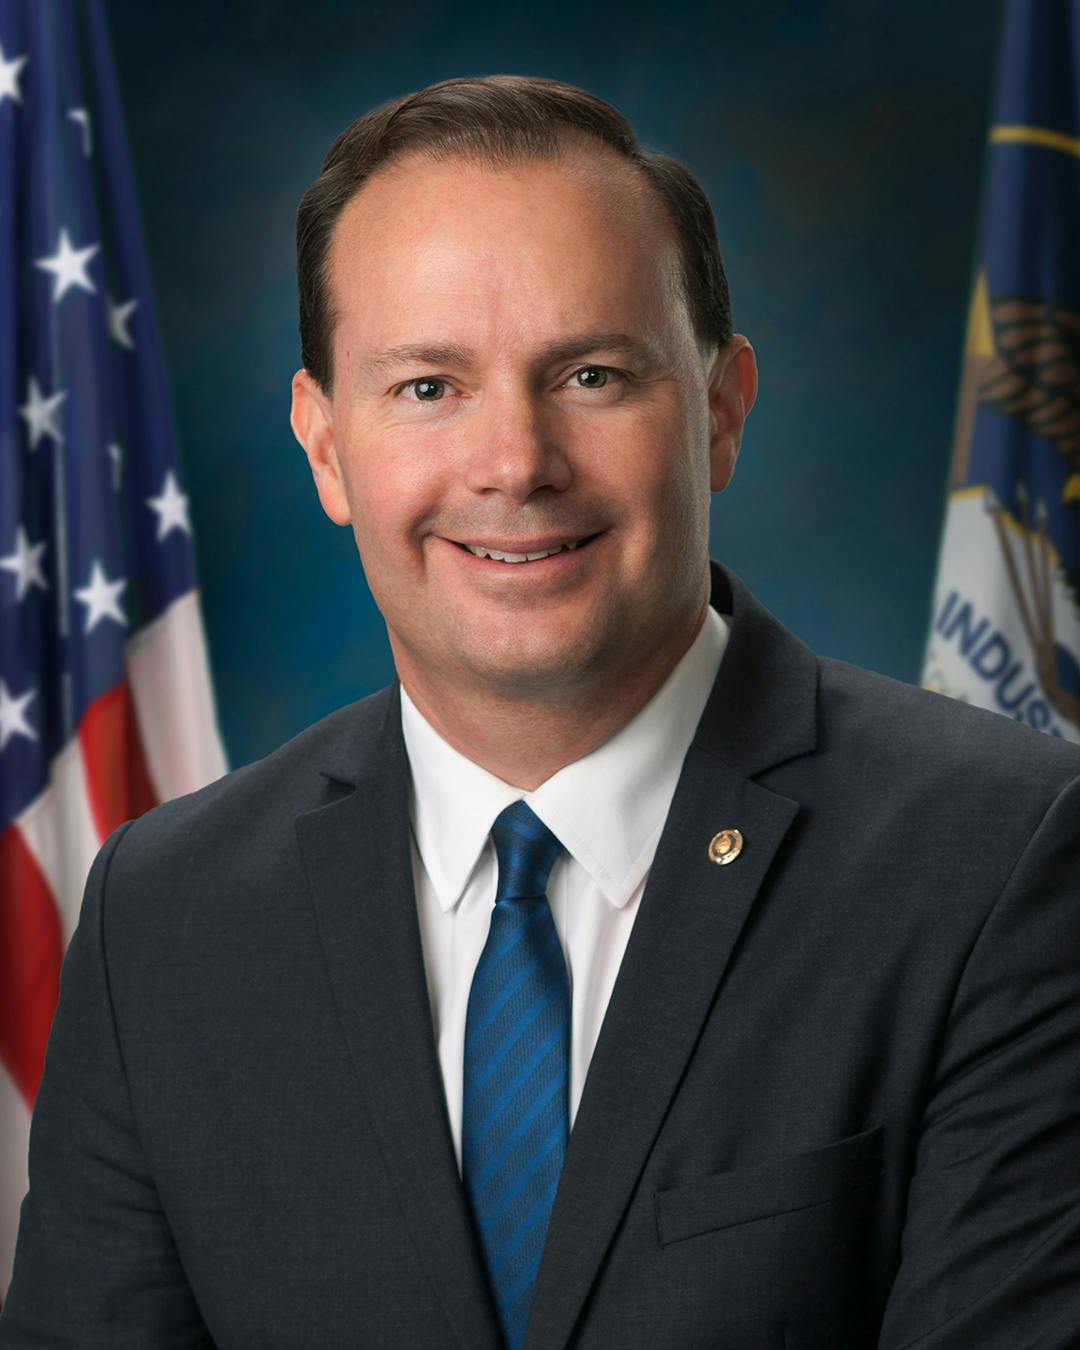 Profile picture of Mike Lee